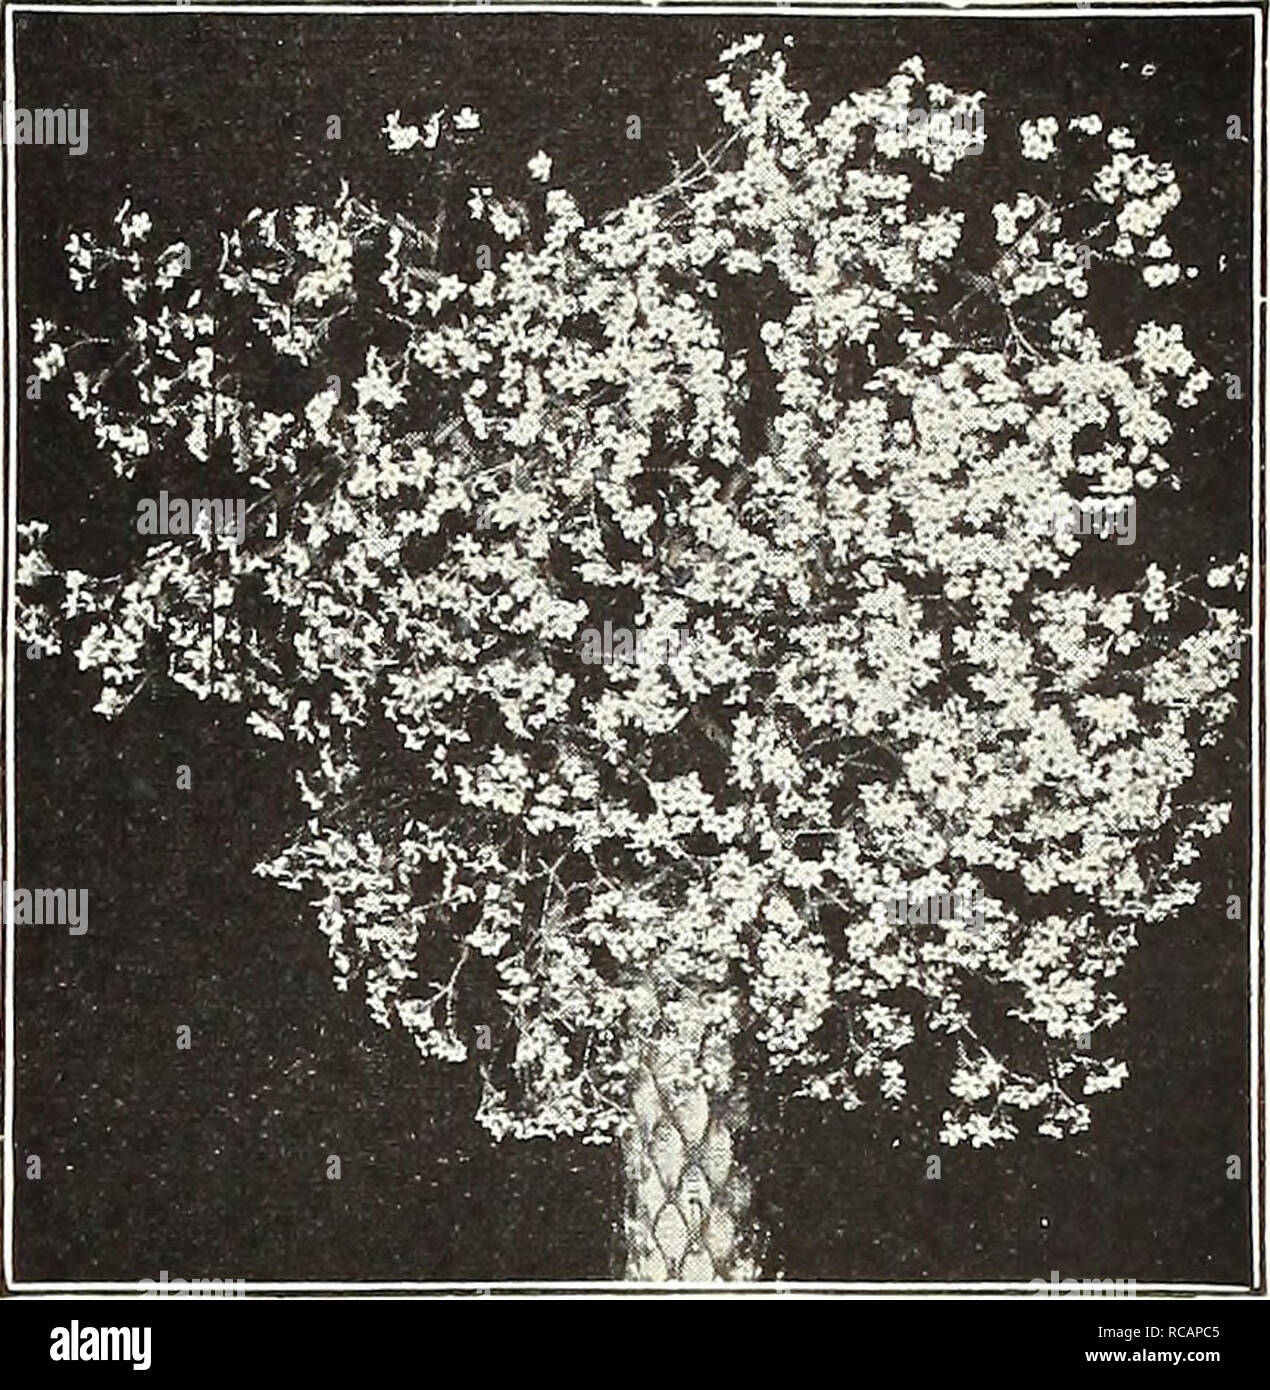 . Dreer's autumn catalogue 1922. Bulbs (Plants) Catalogs; Flowers Seeds Catalogs; Gardening Equipment and supplies Catalogs; Nurseries (Horticulture) Catalogs; Vegetables Seeds Catalogs. /flEHiyMM^iS^i5lMdM.l&amp;||iifeU^iikf^ 39 GYPSOPHILA (Baby. Breath) TheGypsophilas will thrive in any soil in a sunny position, and on ac- count of their gracefully arranged large panicles of minute flowers should be in every garden. Cerastioides. A fine variety for the rockery, growing but 3 inches high, and producing from June to August small white flowers marked witli pink. Paniculata. A beautiful old-fash Stock Photo